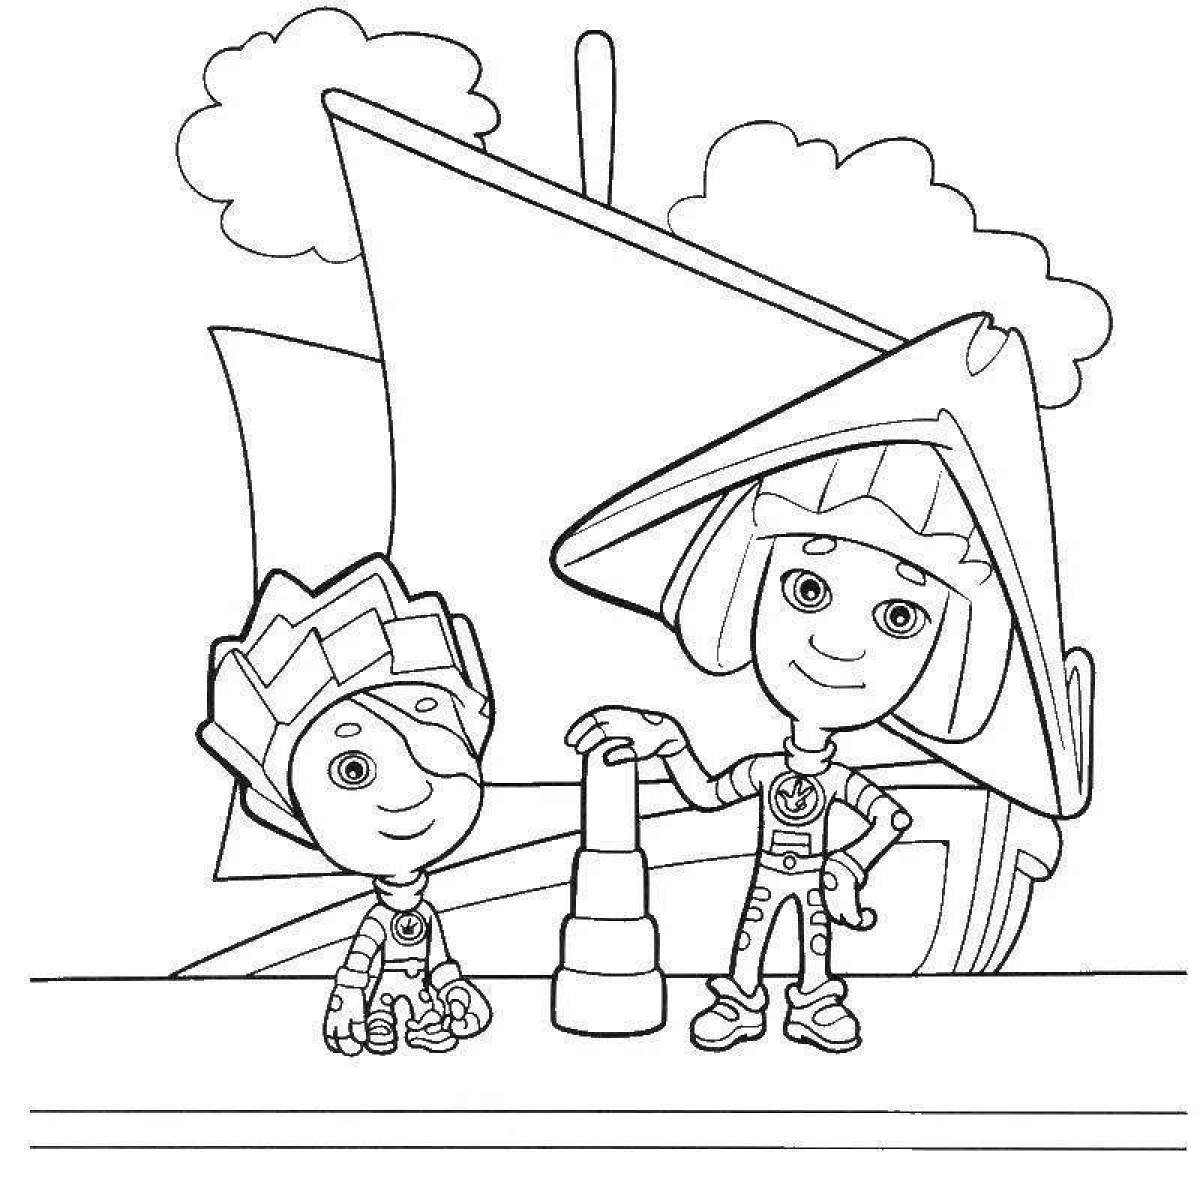 Radiant fixies coloring pages for kids